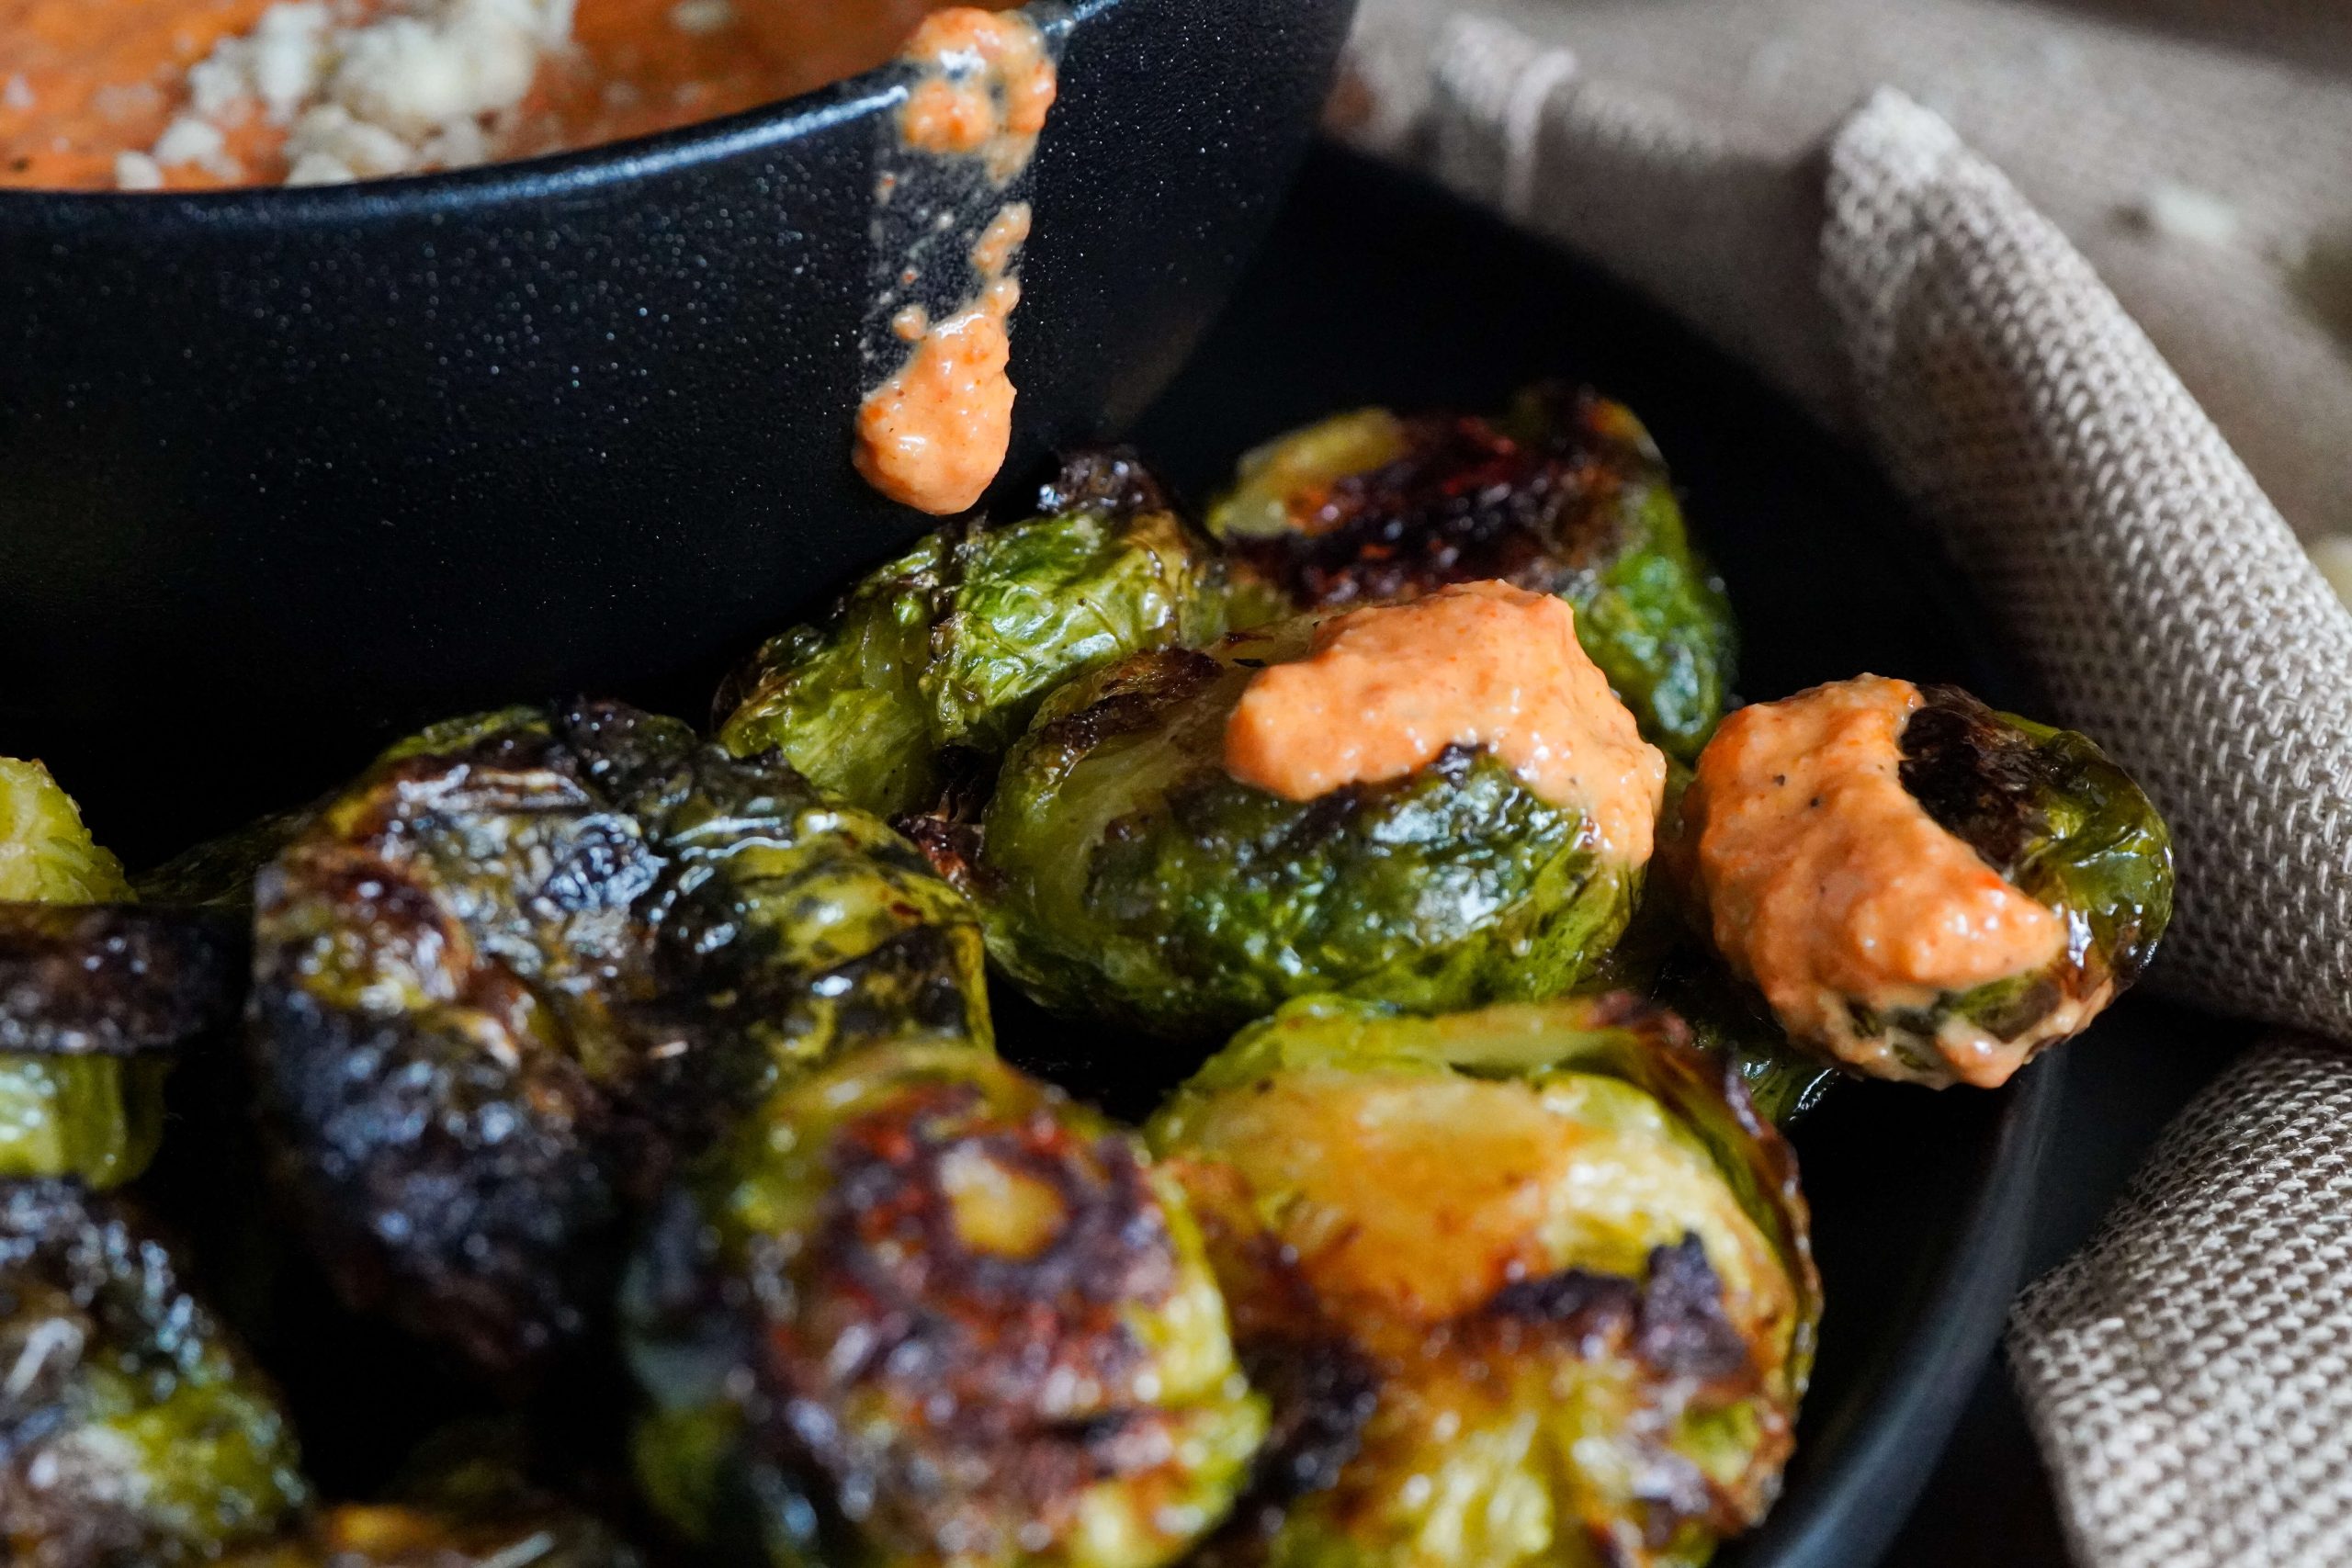 Brussel sprouts with the romesco sauce on them